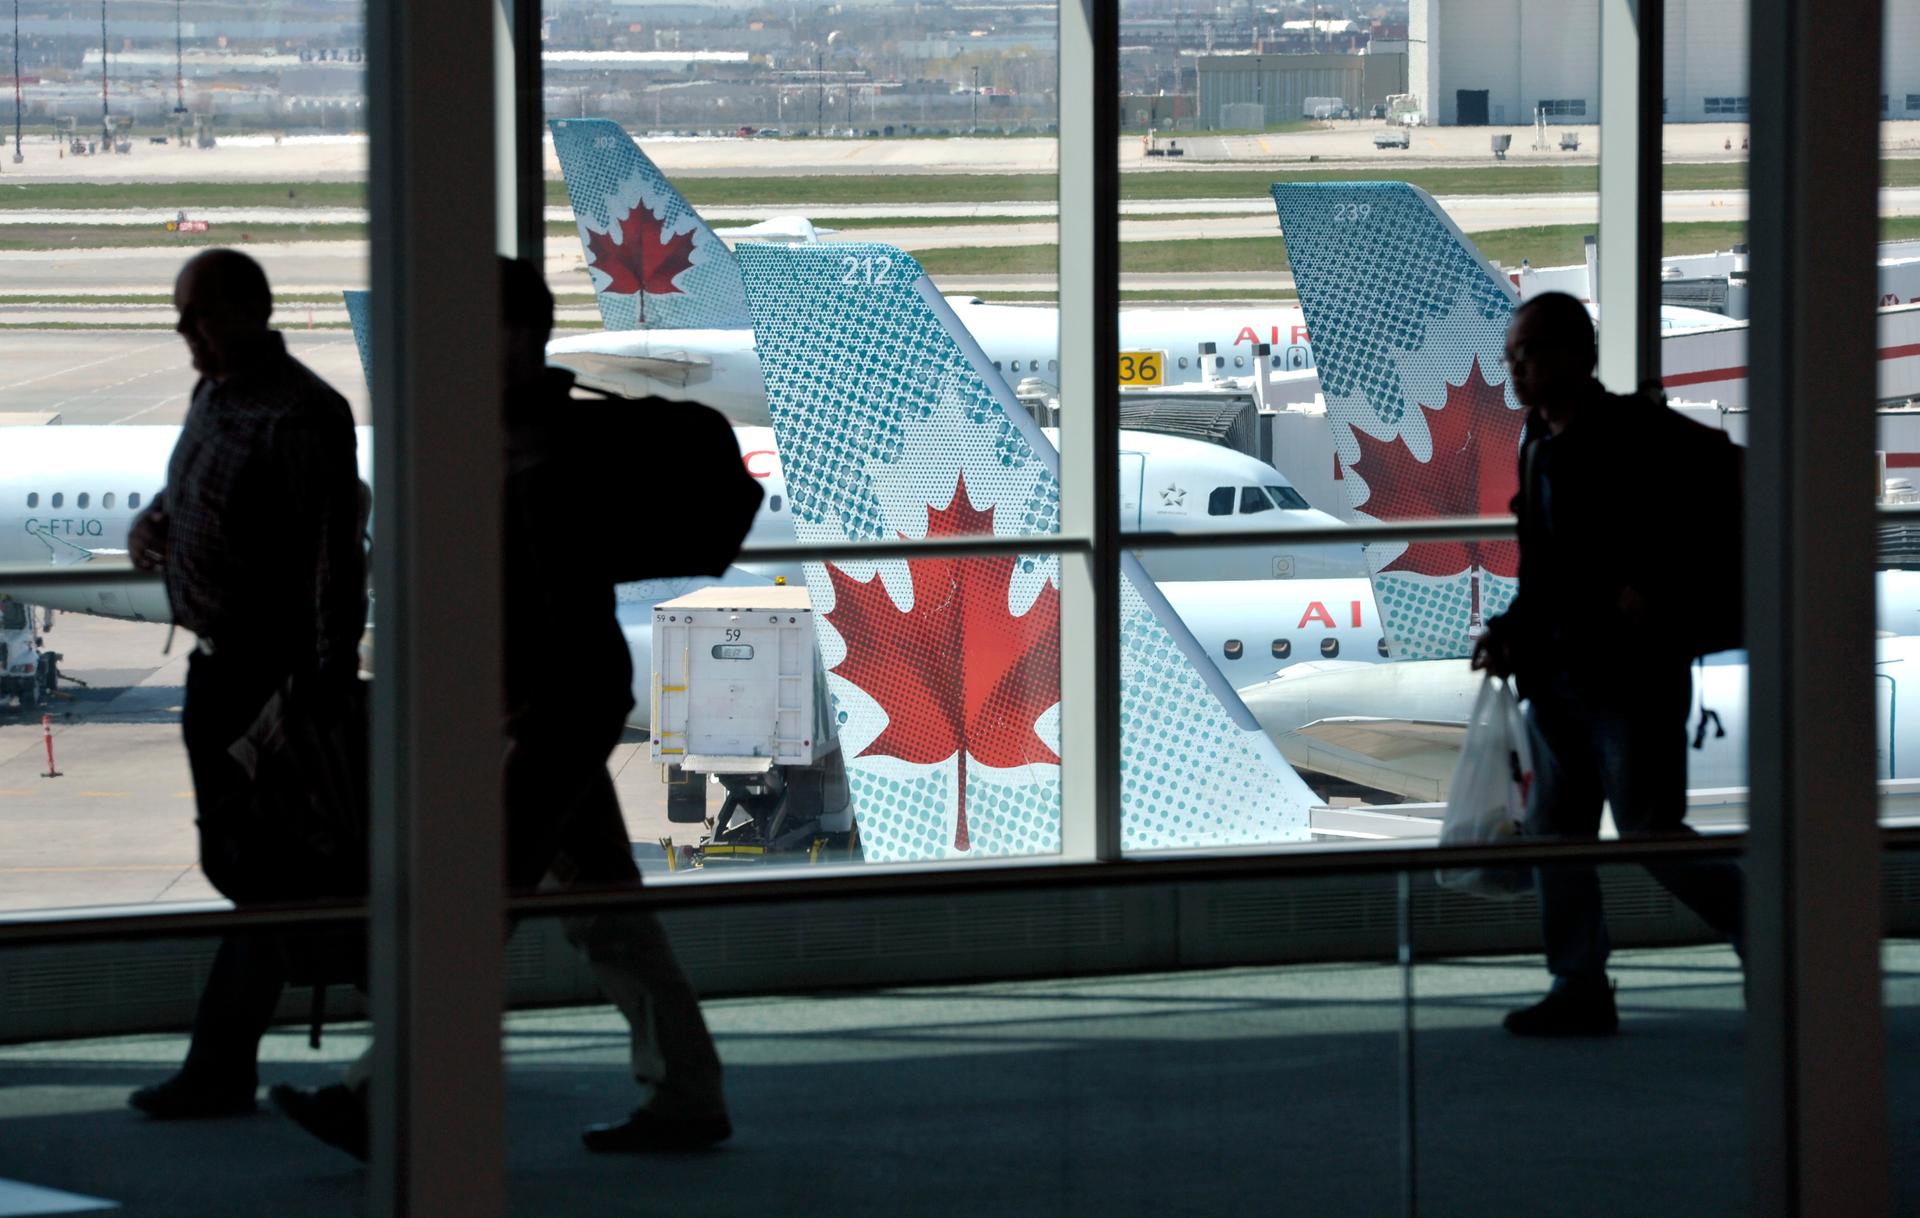 Passengers walk past Air Canada planes on the runway at Pearson International Airport in Toronto April 13, 2012.